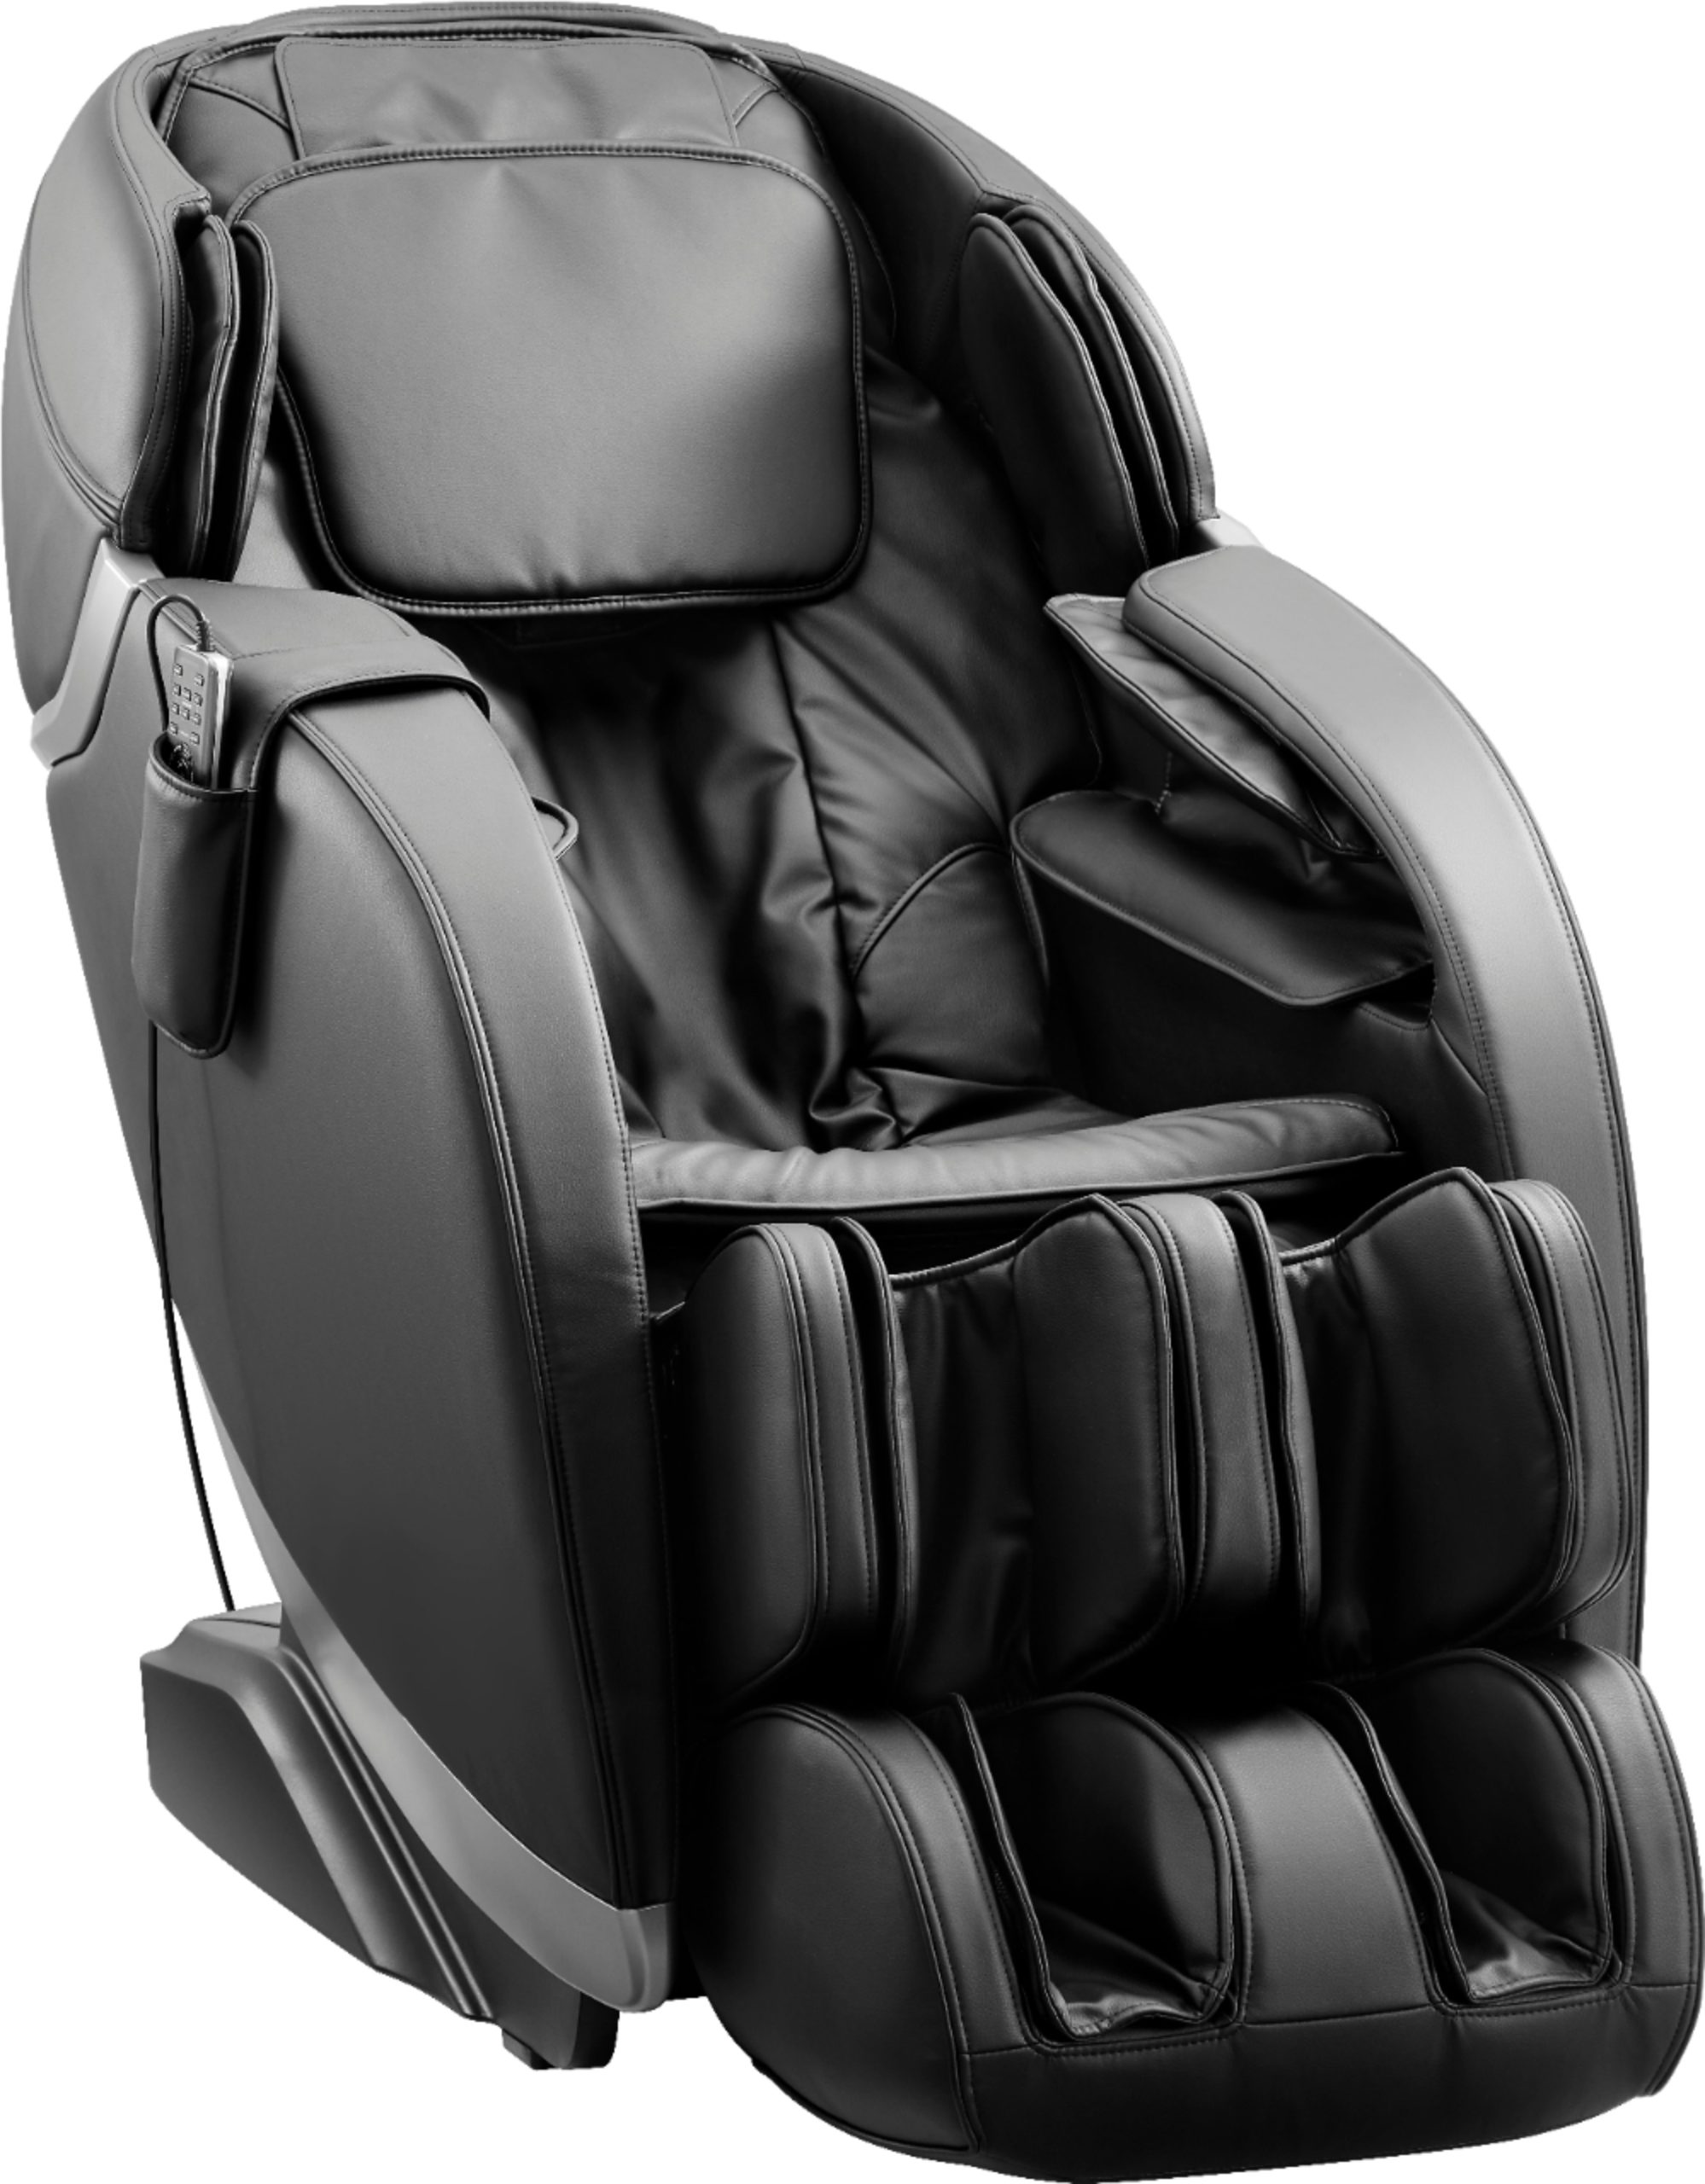 Insignia™ – 2D Zero Gravity Full Body Massage Chair – Black with silver trim – Just $1,249.99 at Best Buy